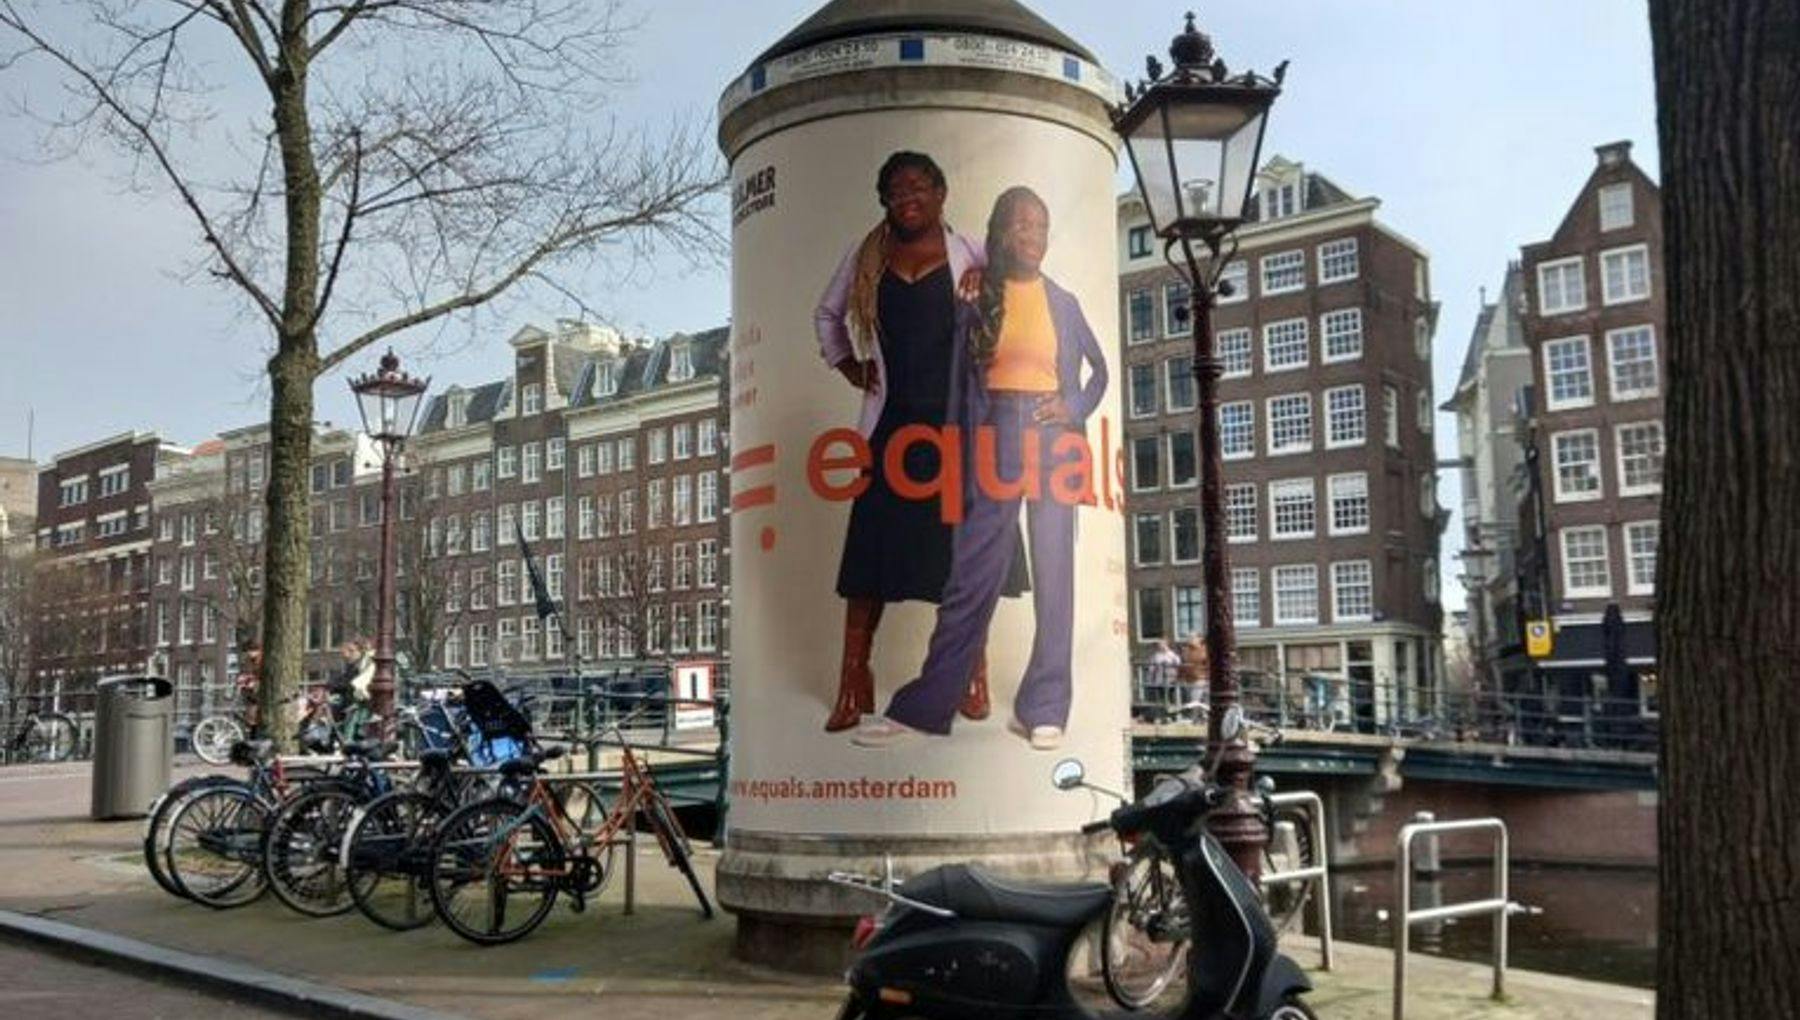 EQUALS Role Models campaign on the street, women in leadership and tech